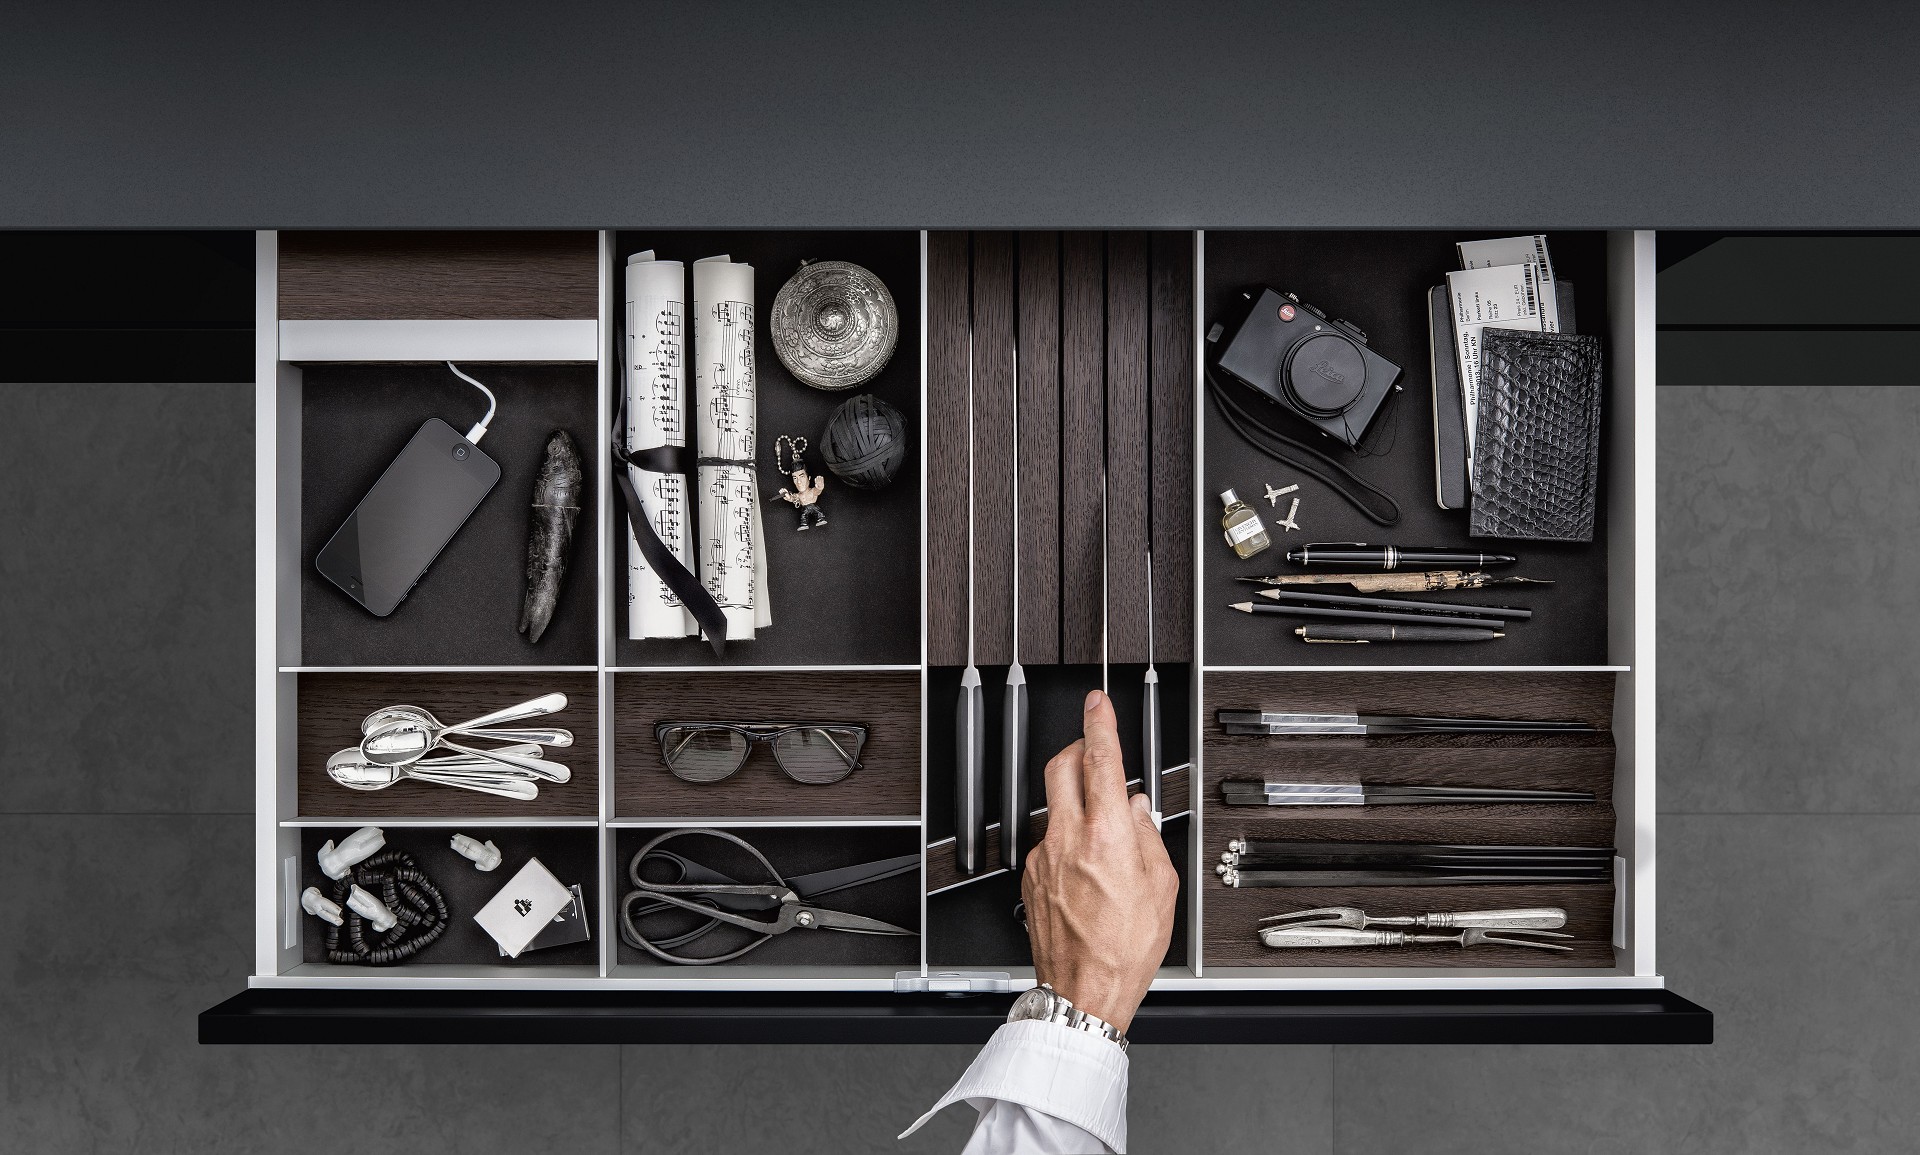 SieMatic aluminum kitchen interior accessories in dark smoked chestnut provide a place for iPhone, cutlery and knives.